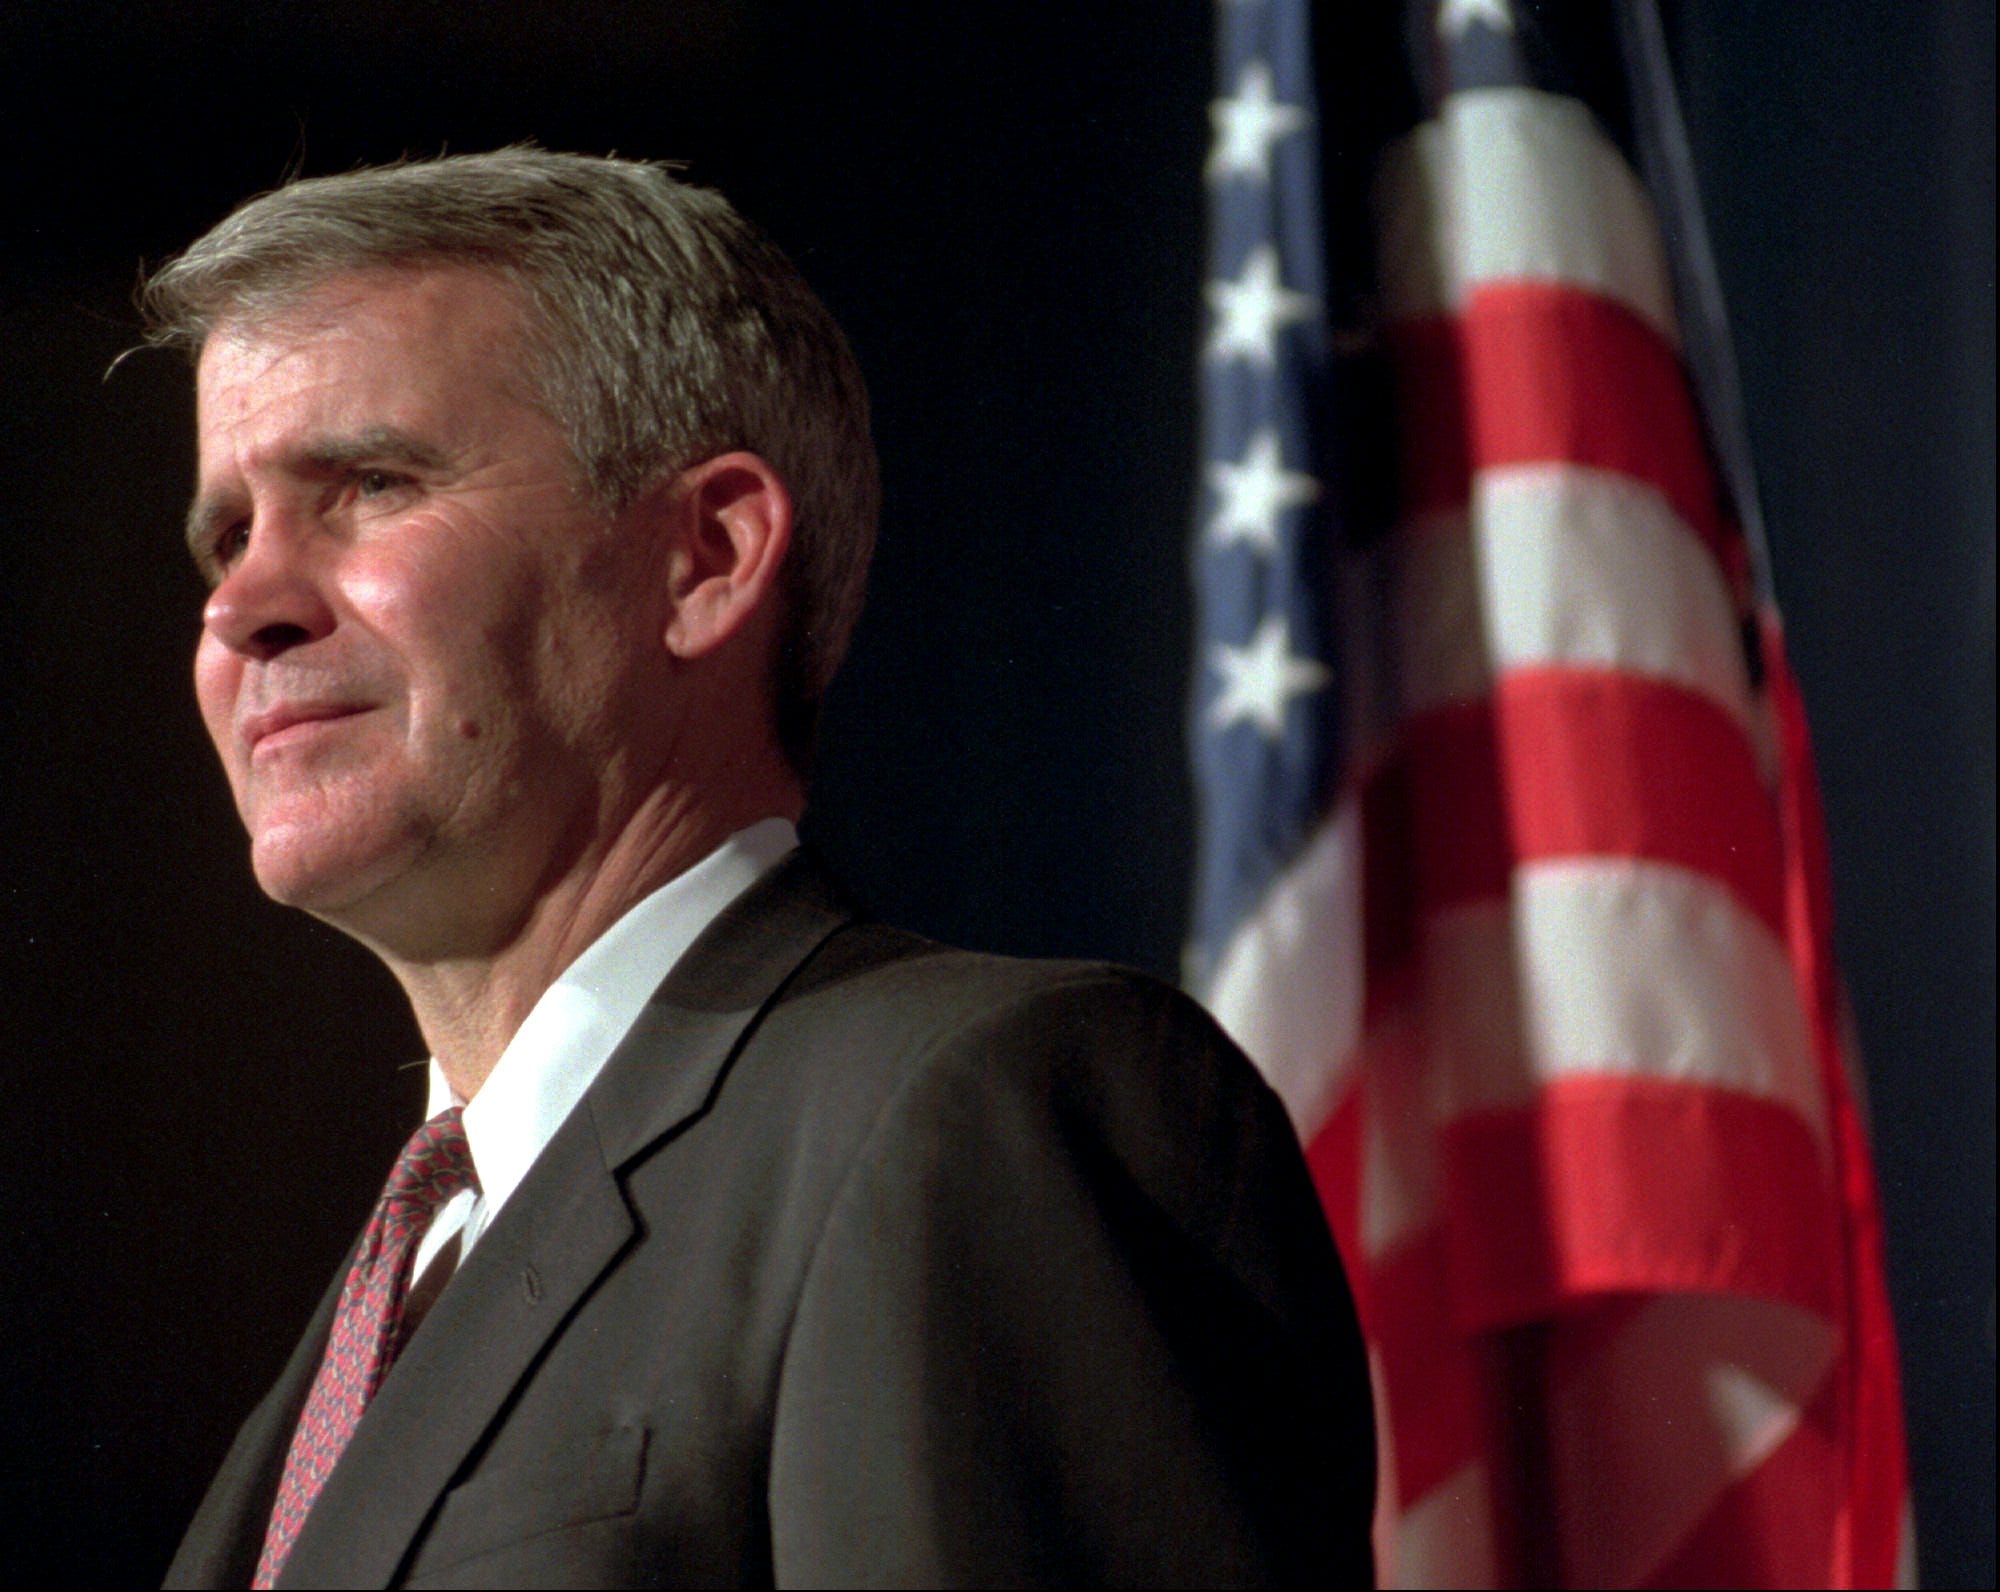 Oliver North was embedded with the Marines and soldiers on Operation Commando Riot as a contributor for Fox News. The Fox segment, accompanying online story and chapter in North's book presented a false depiction of a successful mission.